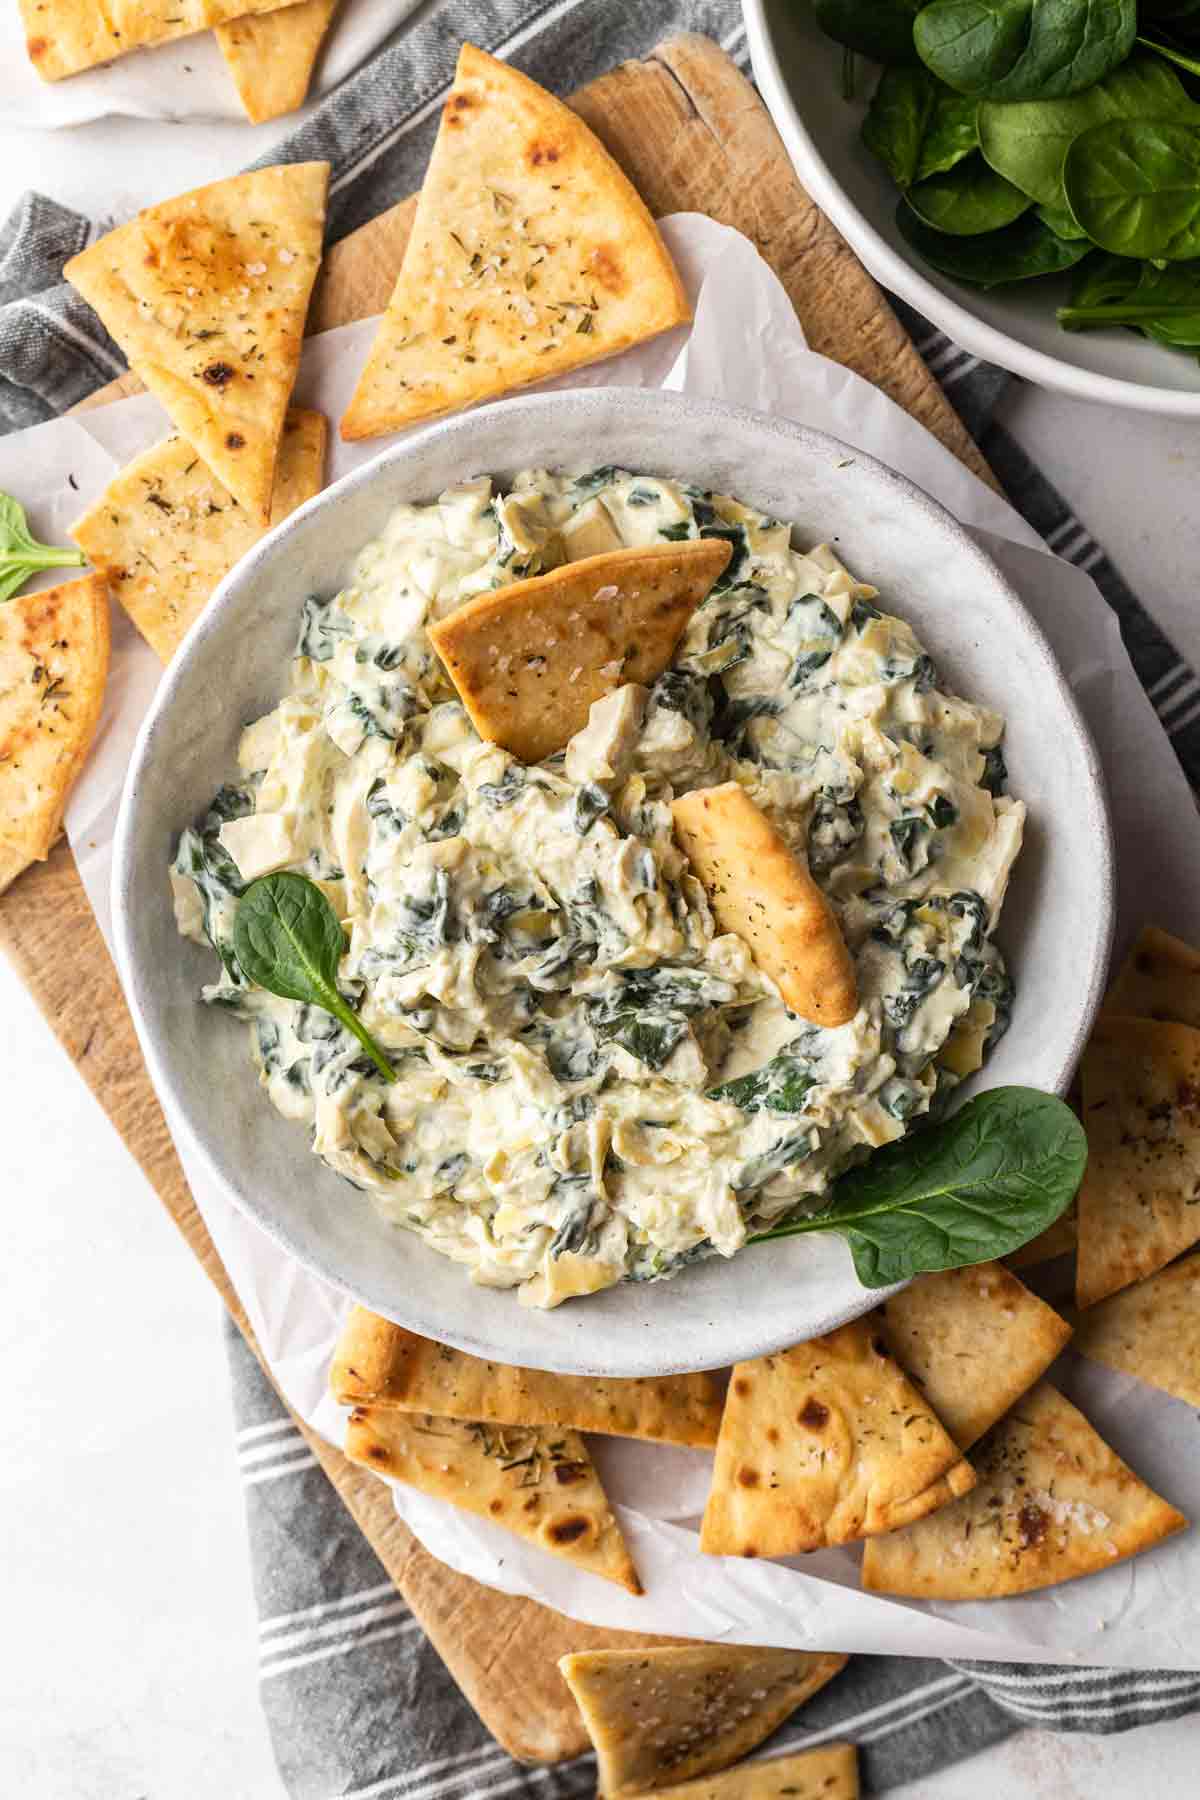 5-Ingredient Spinach Artichoke Dip with Toasted Pitas